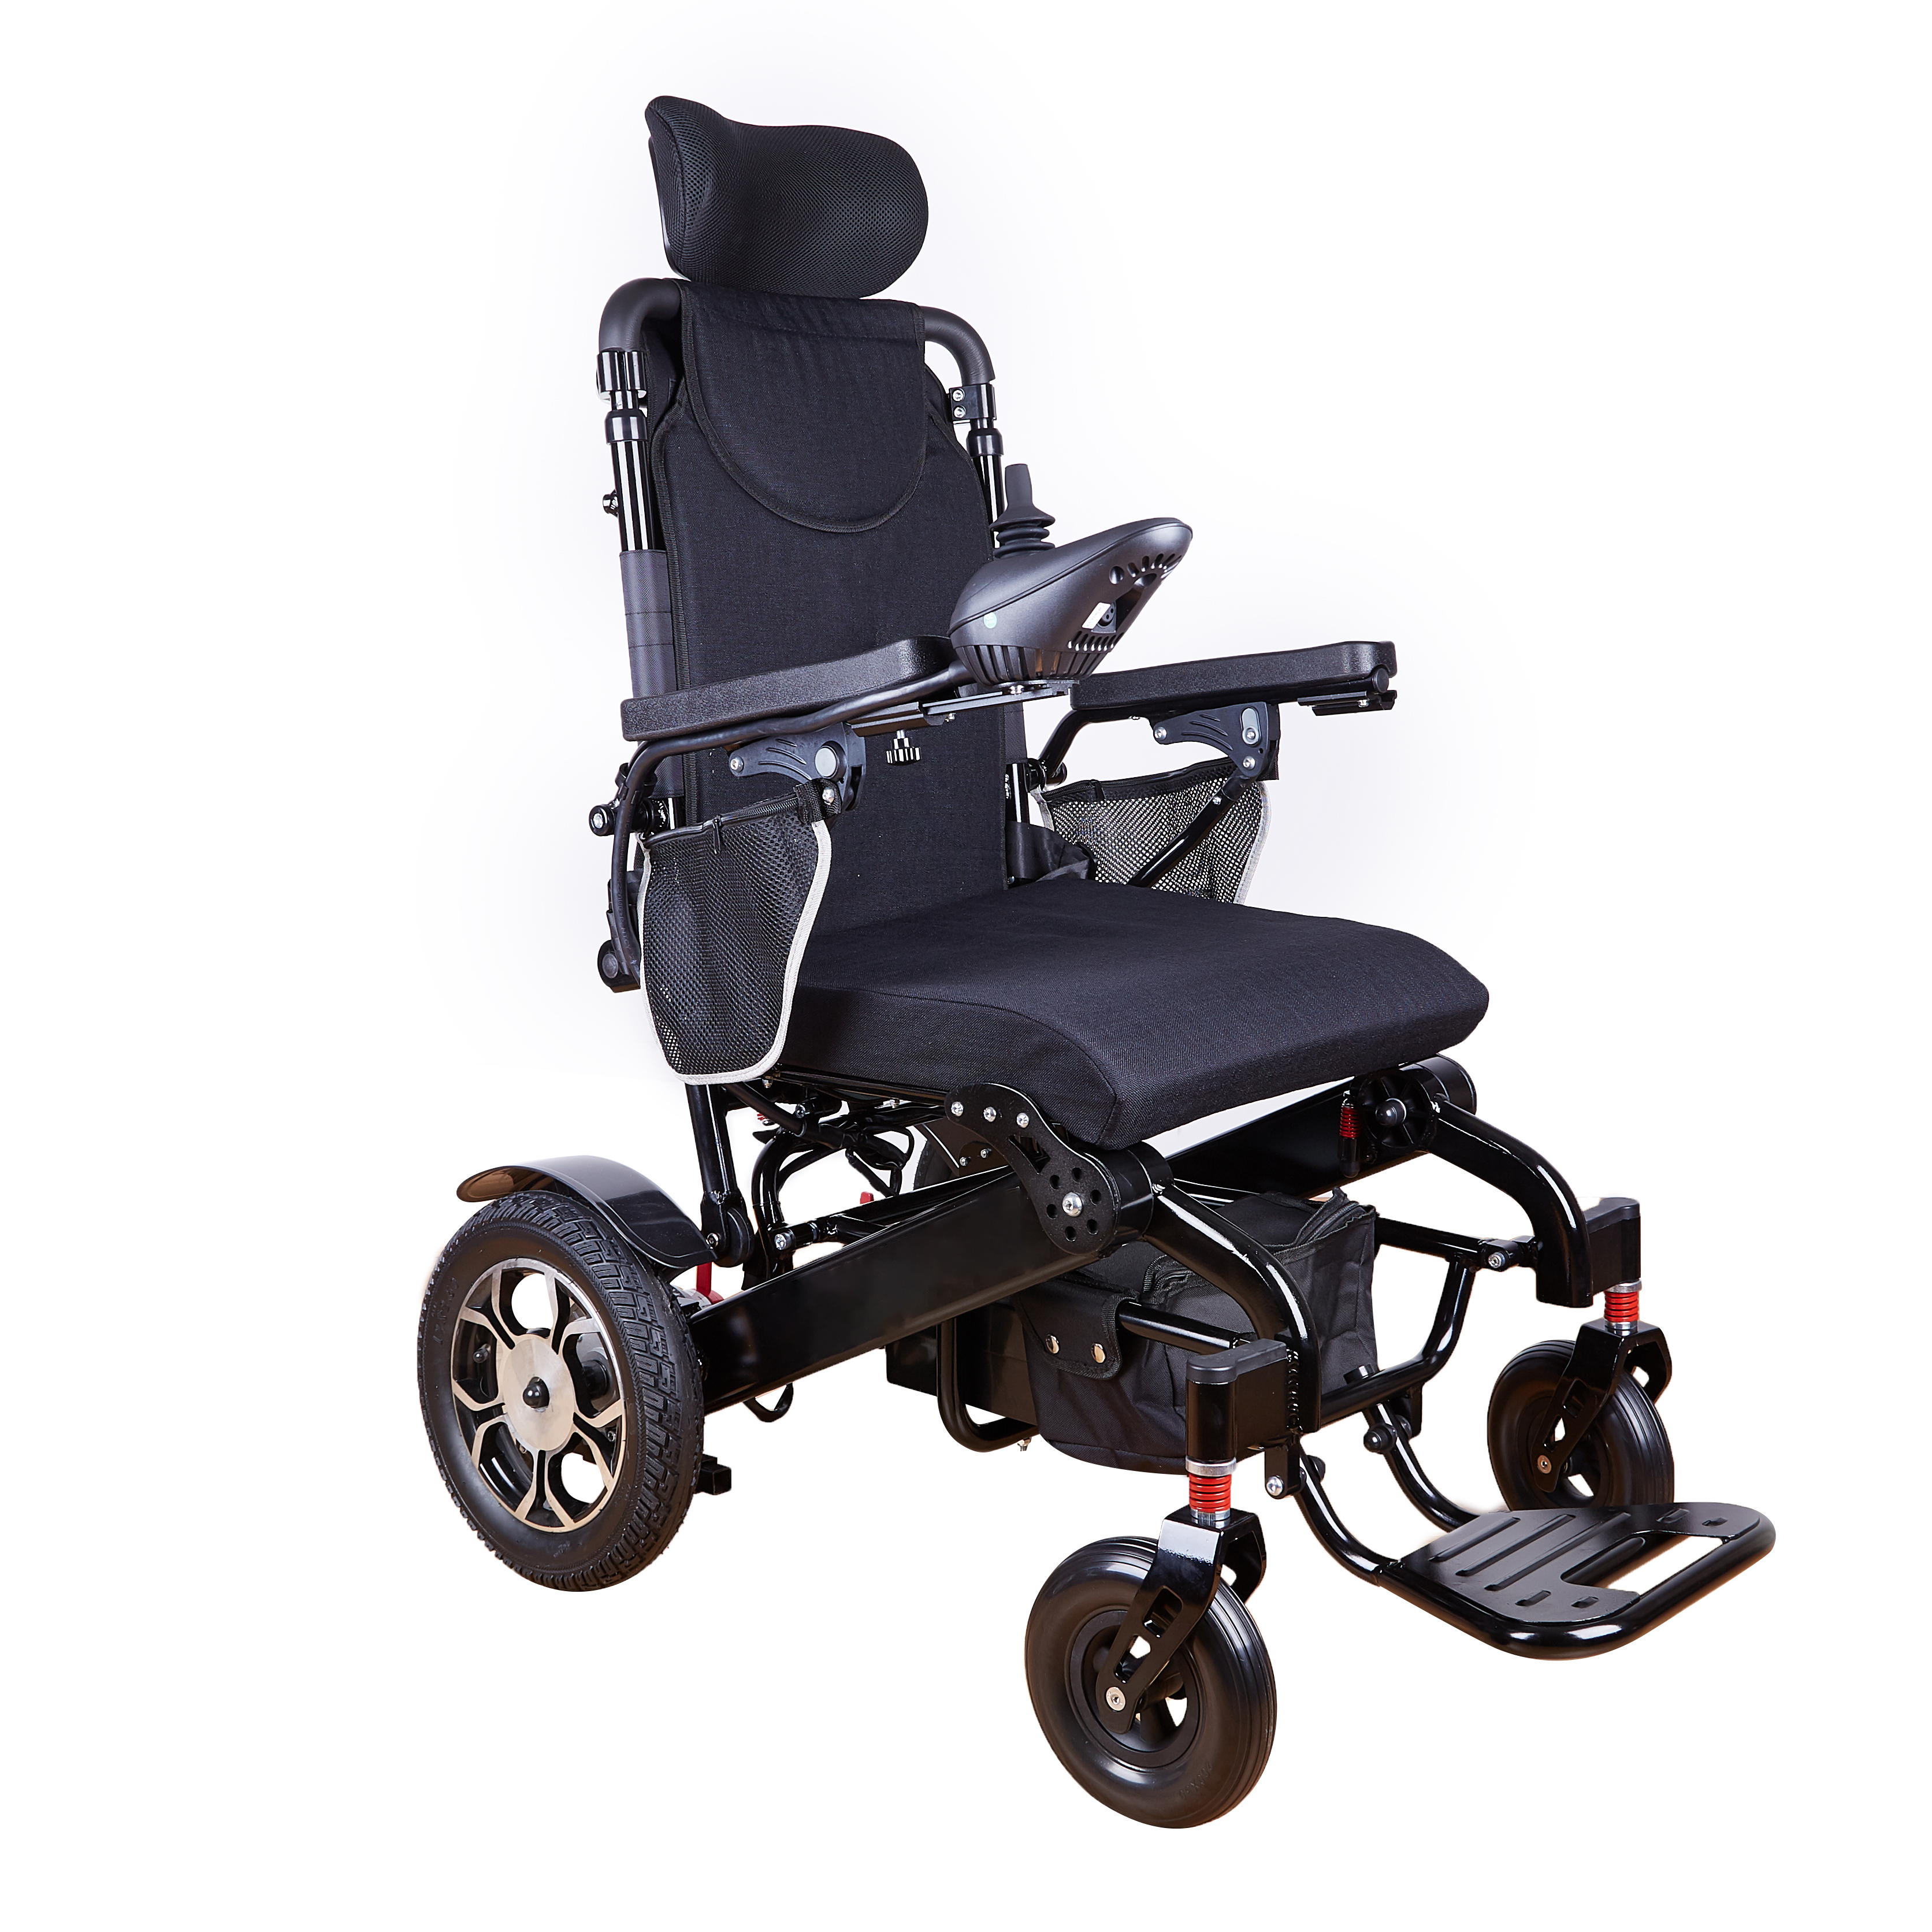 Folding Automatic Electronic Motorized Electric Wheelchair Lightweight Power Aluminum Wheelchairs Pakistan for Disabled Price Featured Image